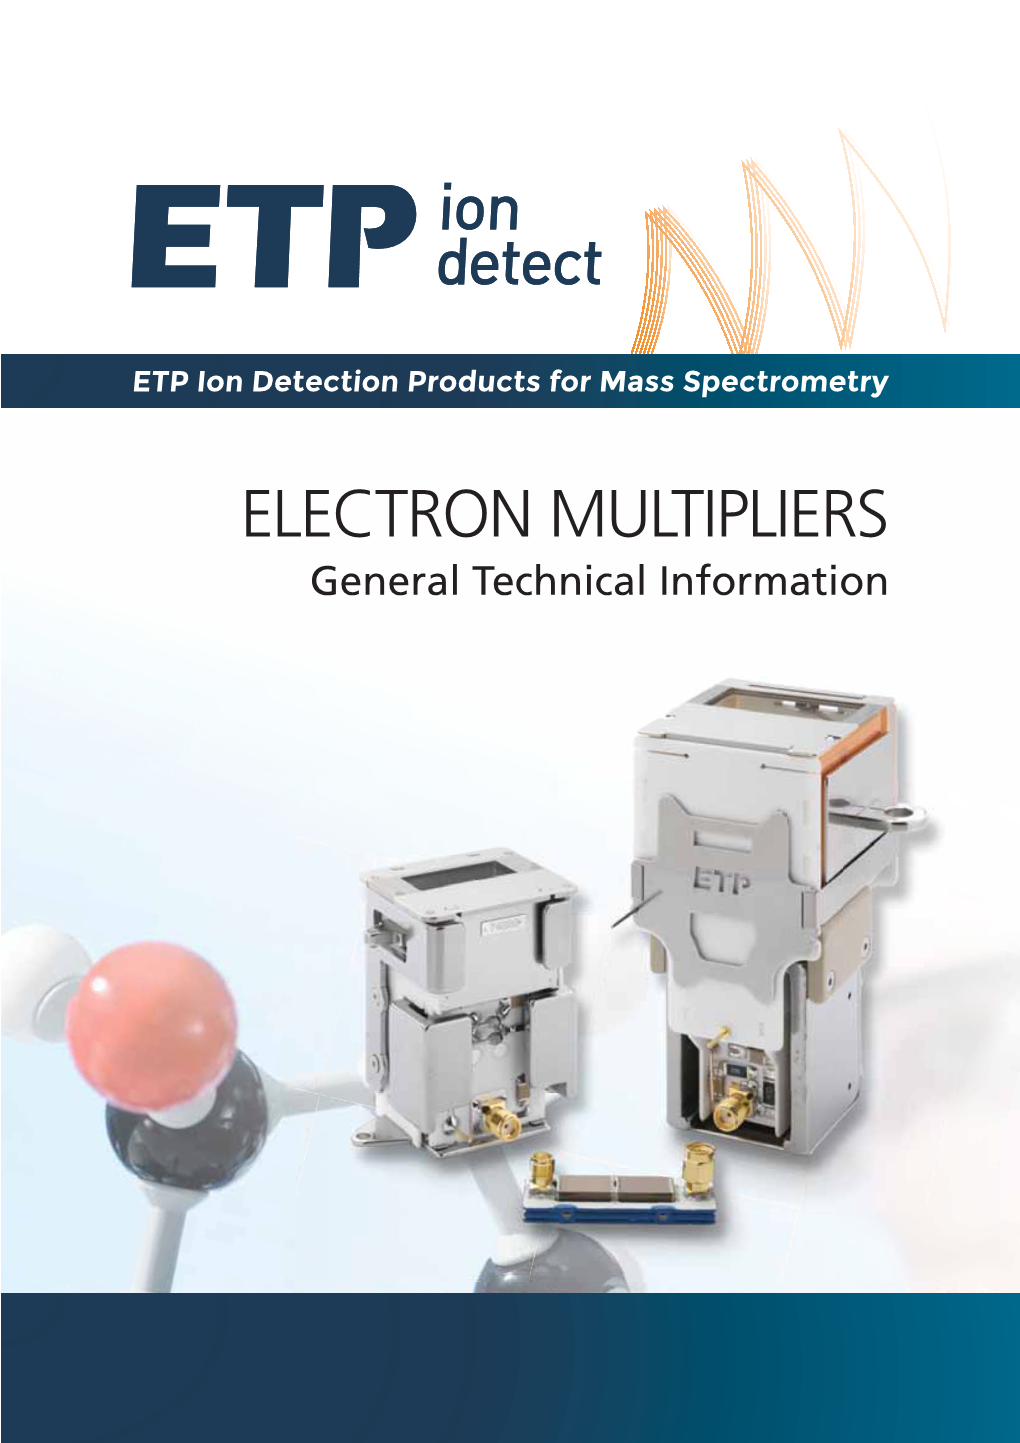 ELECTRON MULTIPLIERS General Technical Information the Specifications in This Booklet Are Subject to Change